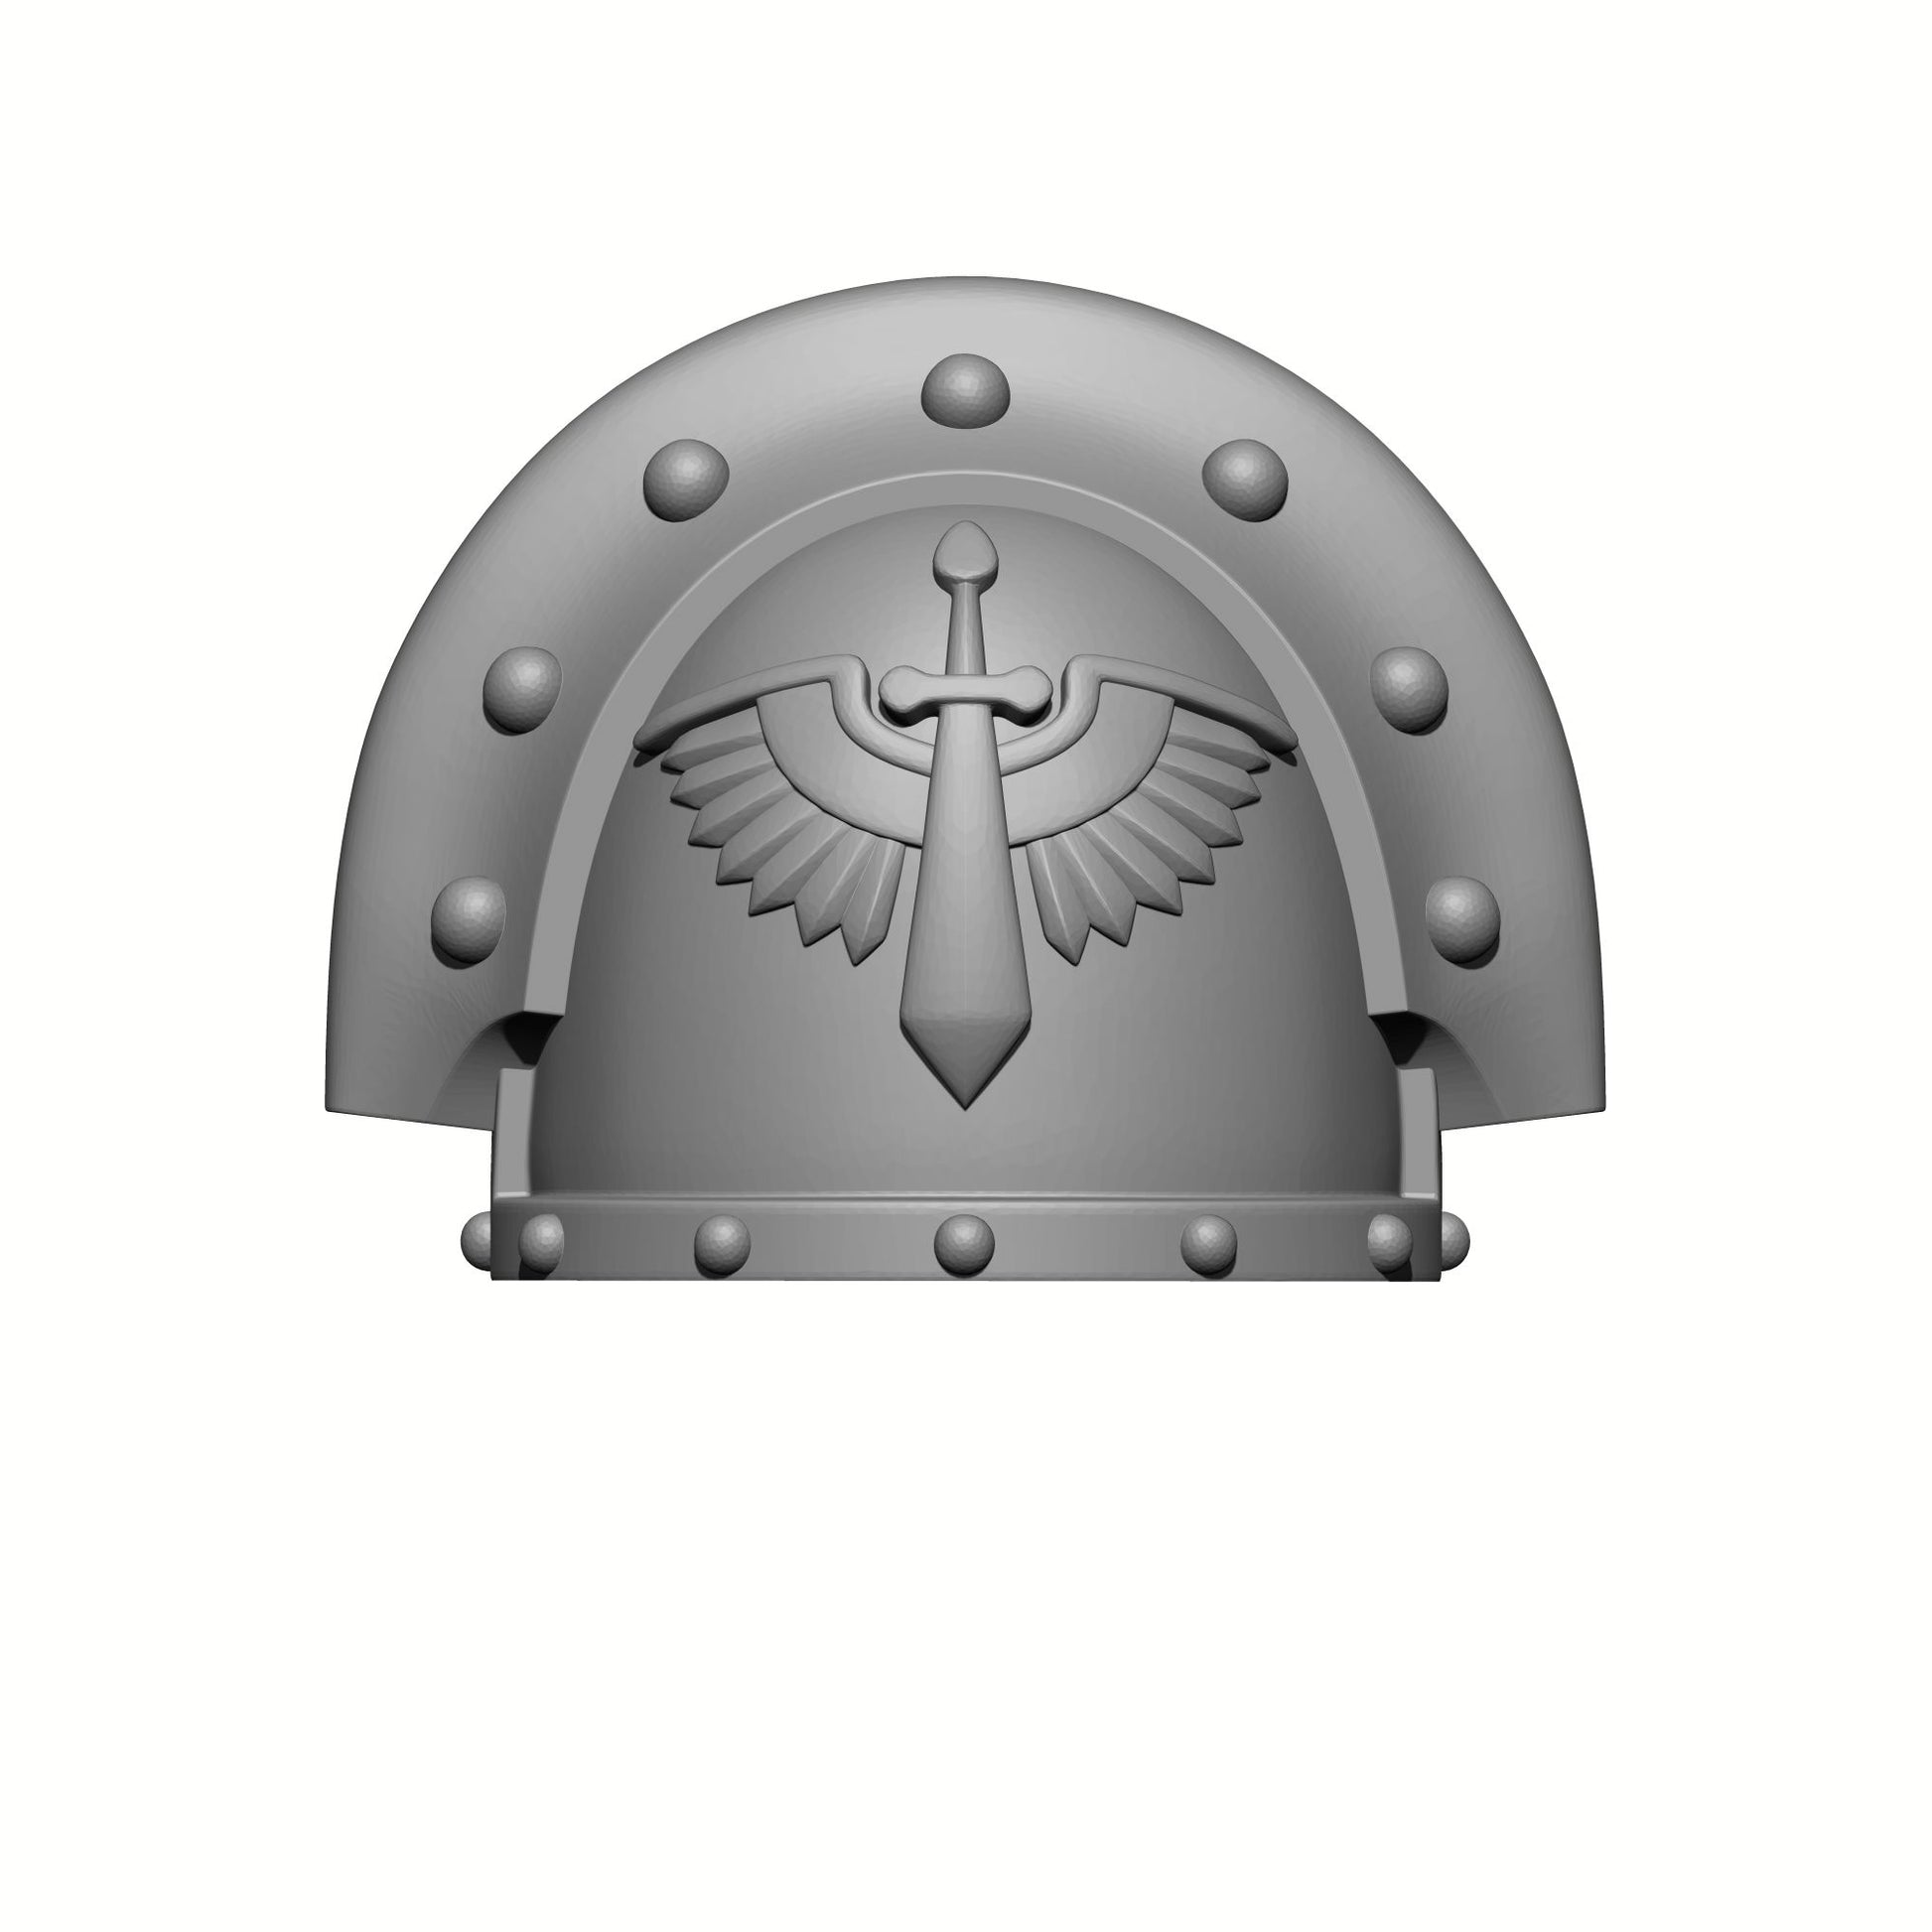 The 18th Scale Armory Dark Angels MKIII Shoulder Pad Gen: 3 Pauldron are compatible with the Dark Angels Legion JoyToy Space Marines*, from the Heresy era.